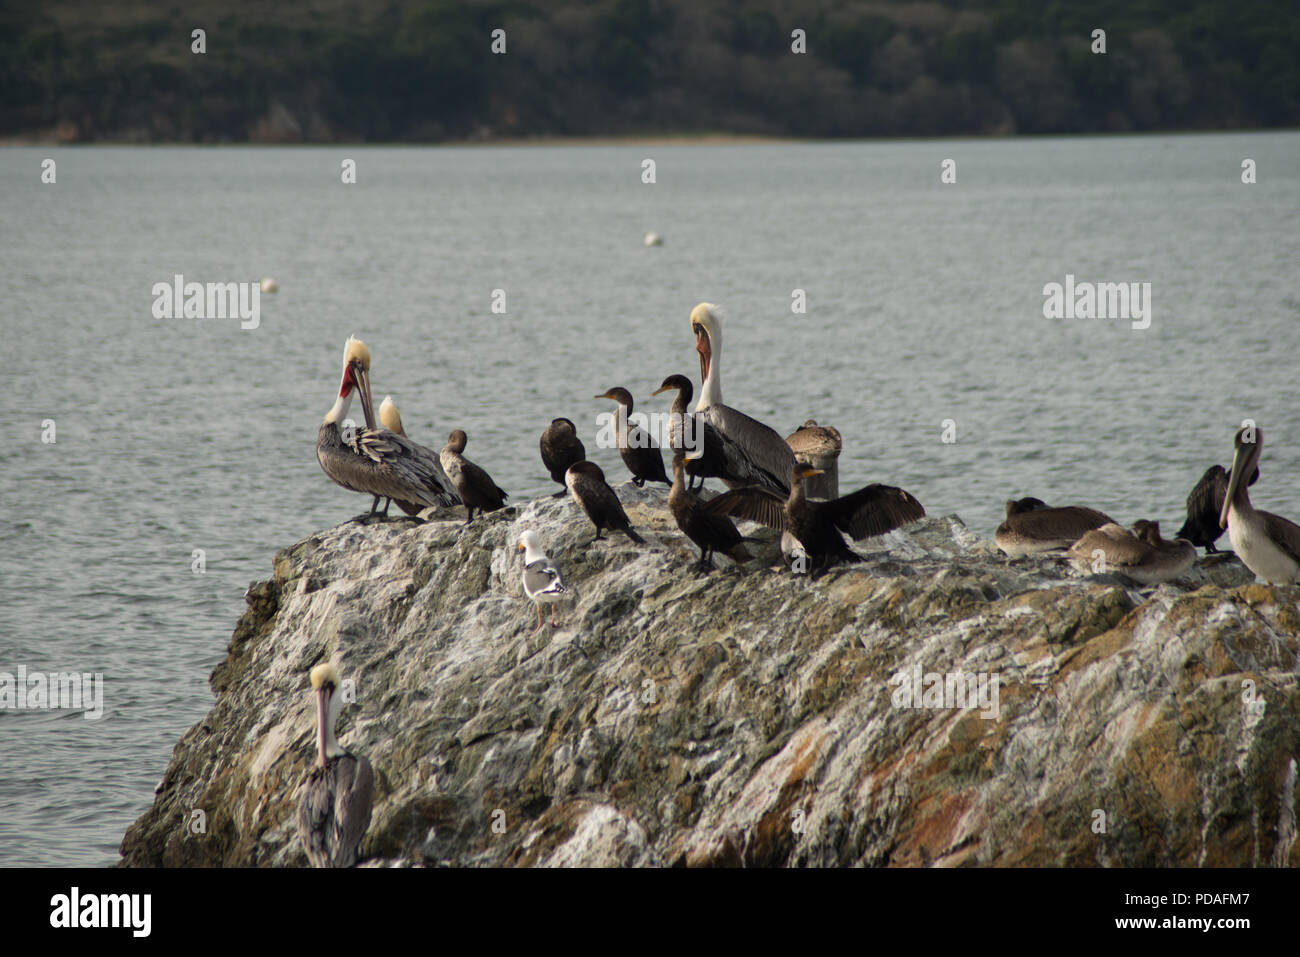 California Brown Pelicans, Cormorants, and seagulls on a rocky surface, water in the background. The birds grooming themselves, resting, plucking at t Stock Photo